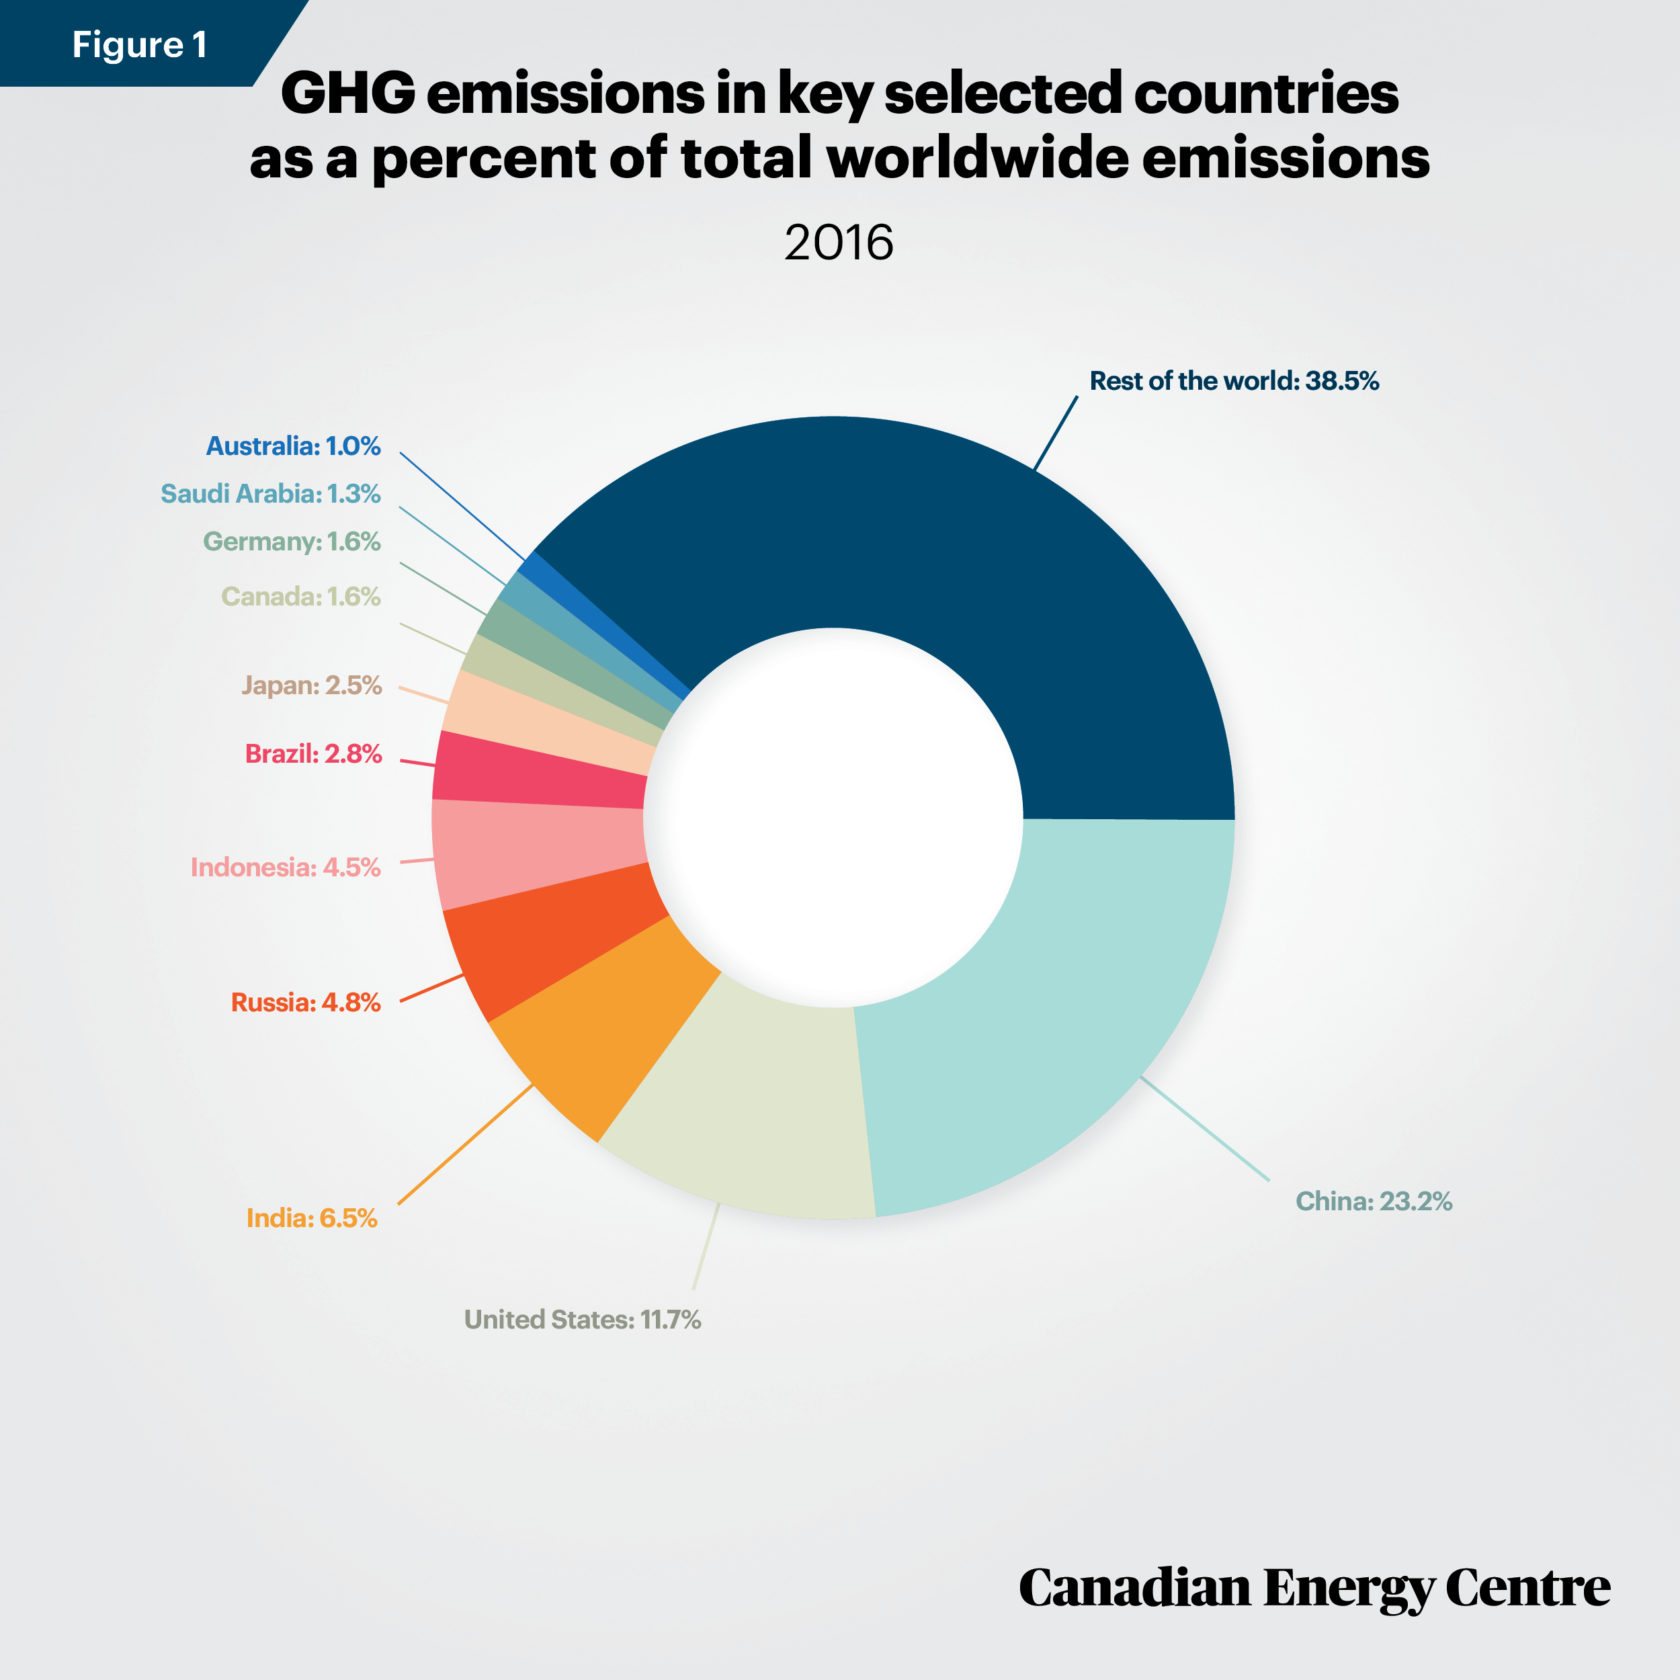 Evaluating the Canadian oil and gas sector’s GHG emissions intensity